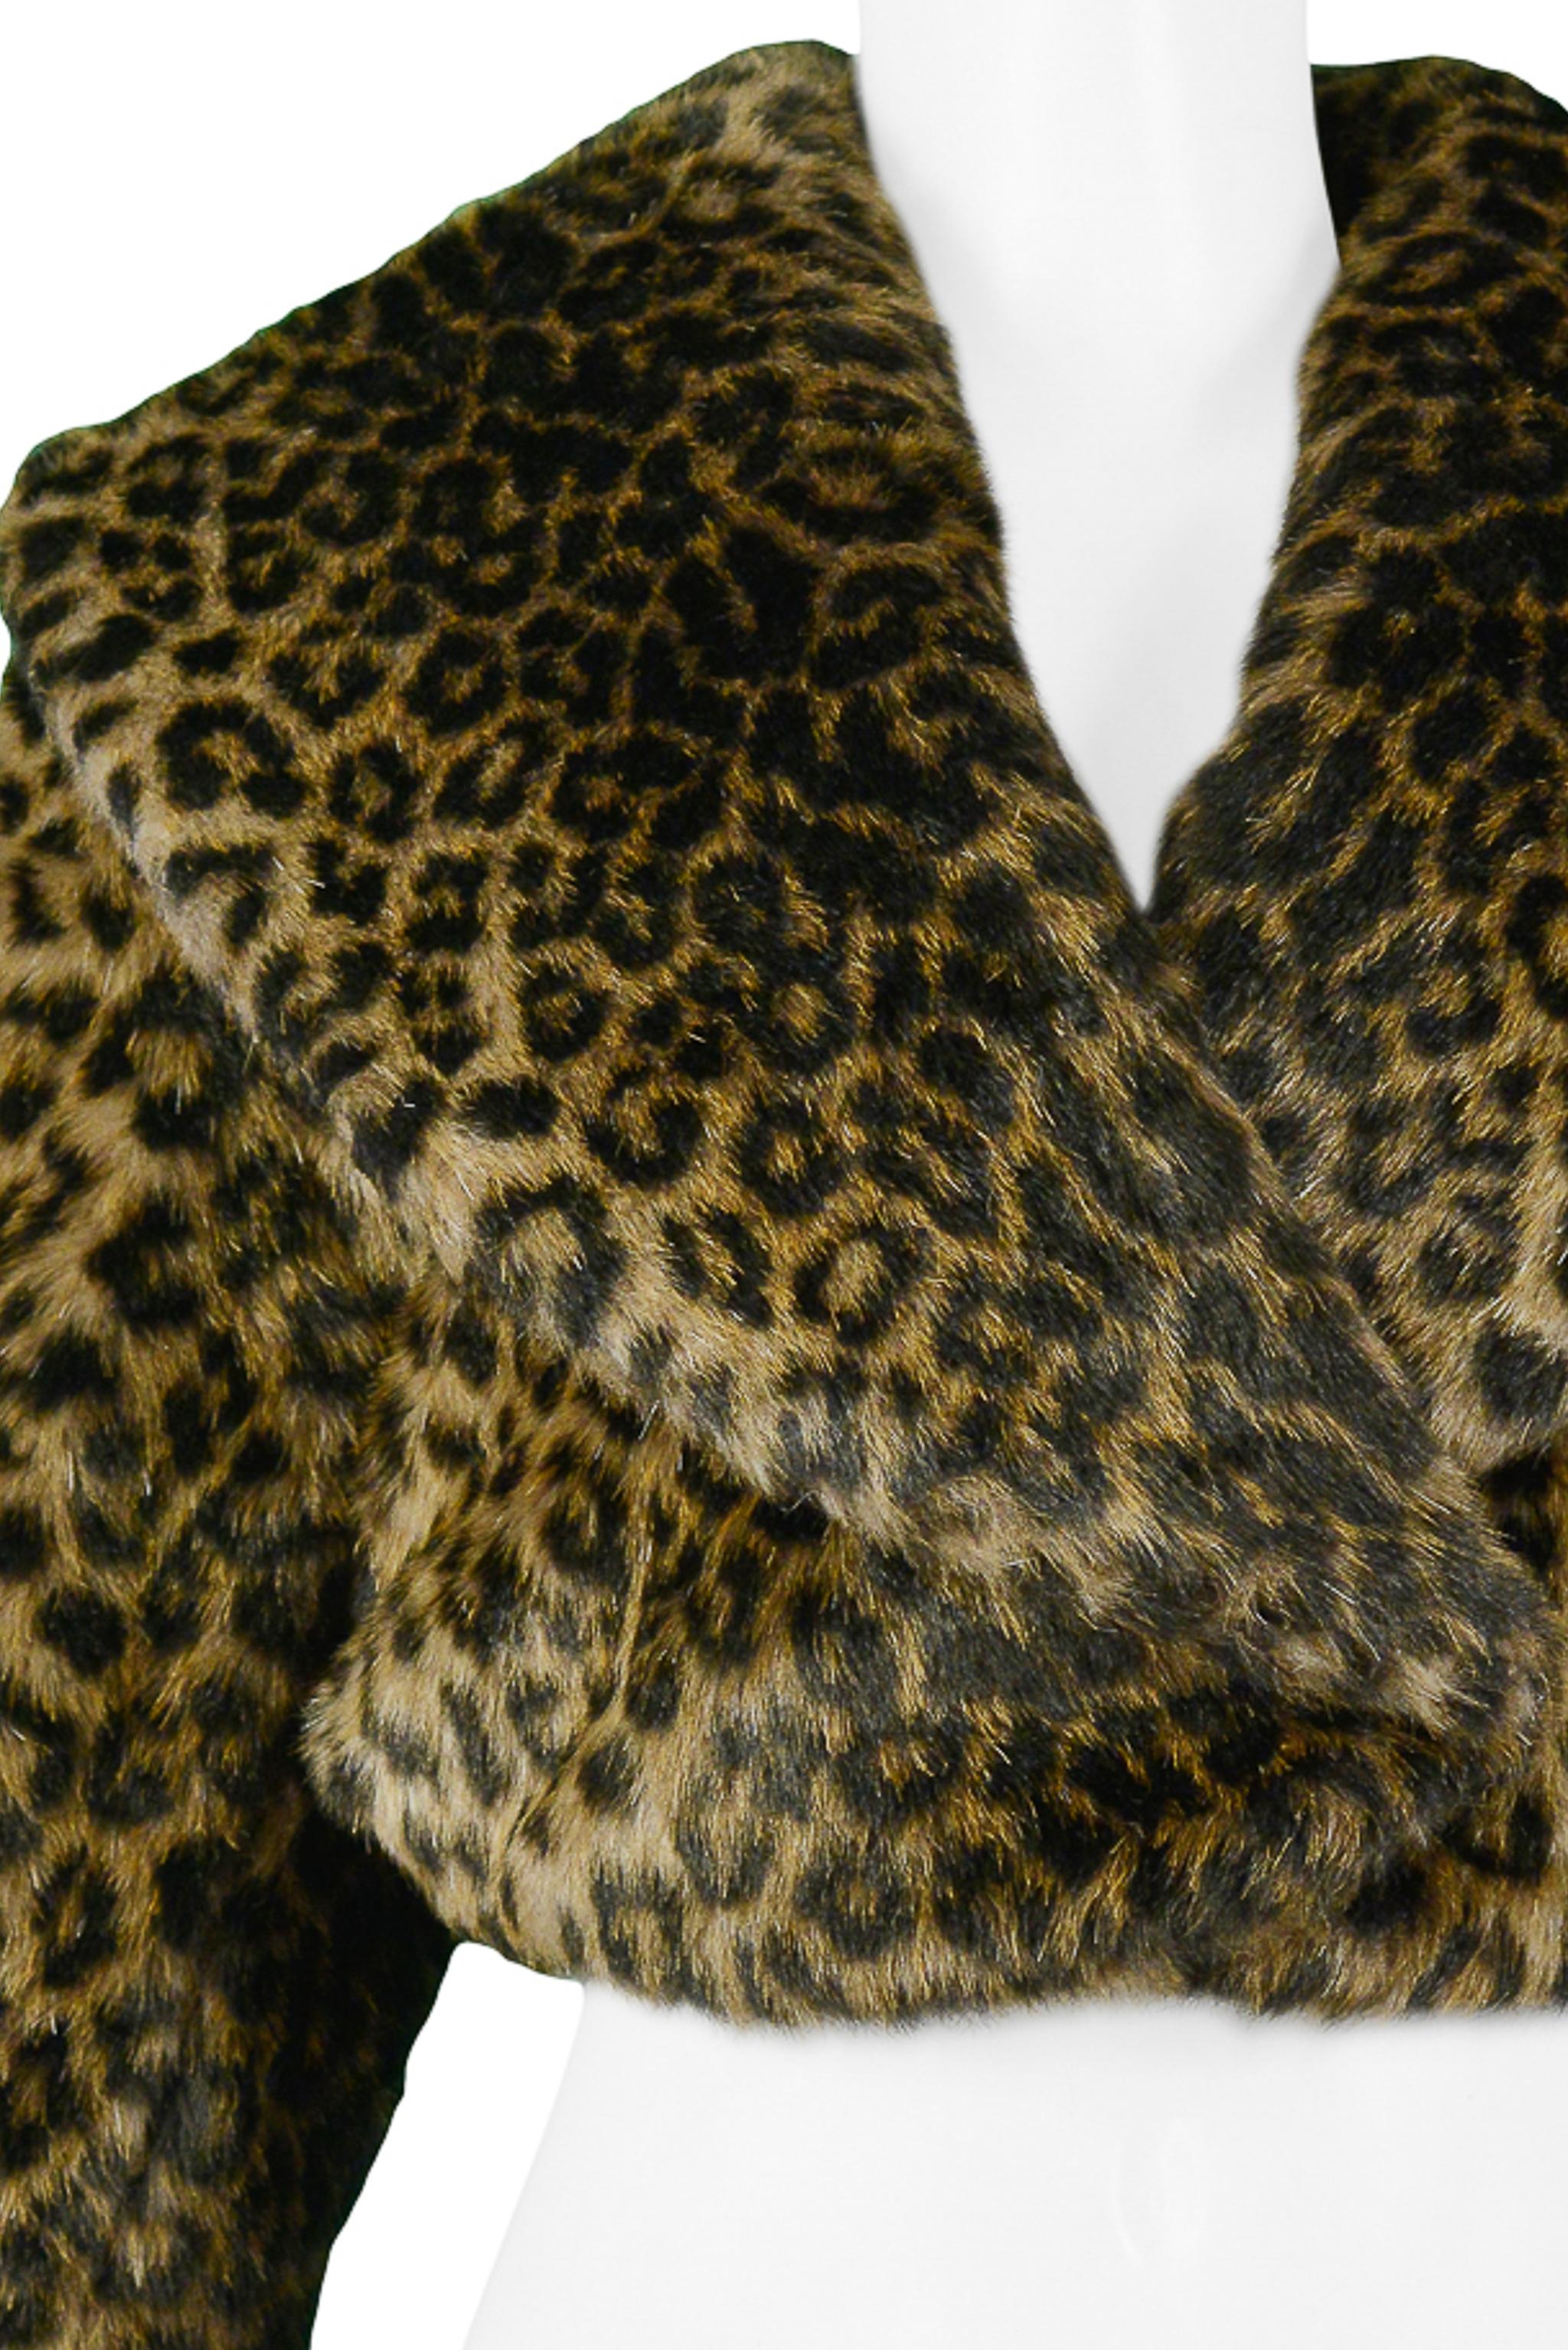 We are excited to offer a rare vintage Azzedine Alaia leopard faux fur cropped jacket. This stunning and luxurious jacket features a dramatic oversized shawl collar, overlapping front flaps, and hook and eye closure. Collection AW 1991.

Alaia